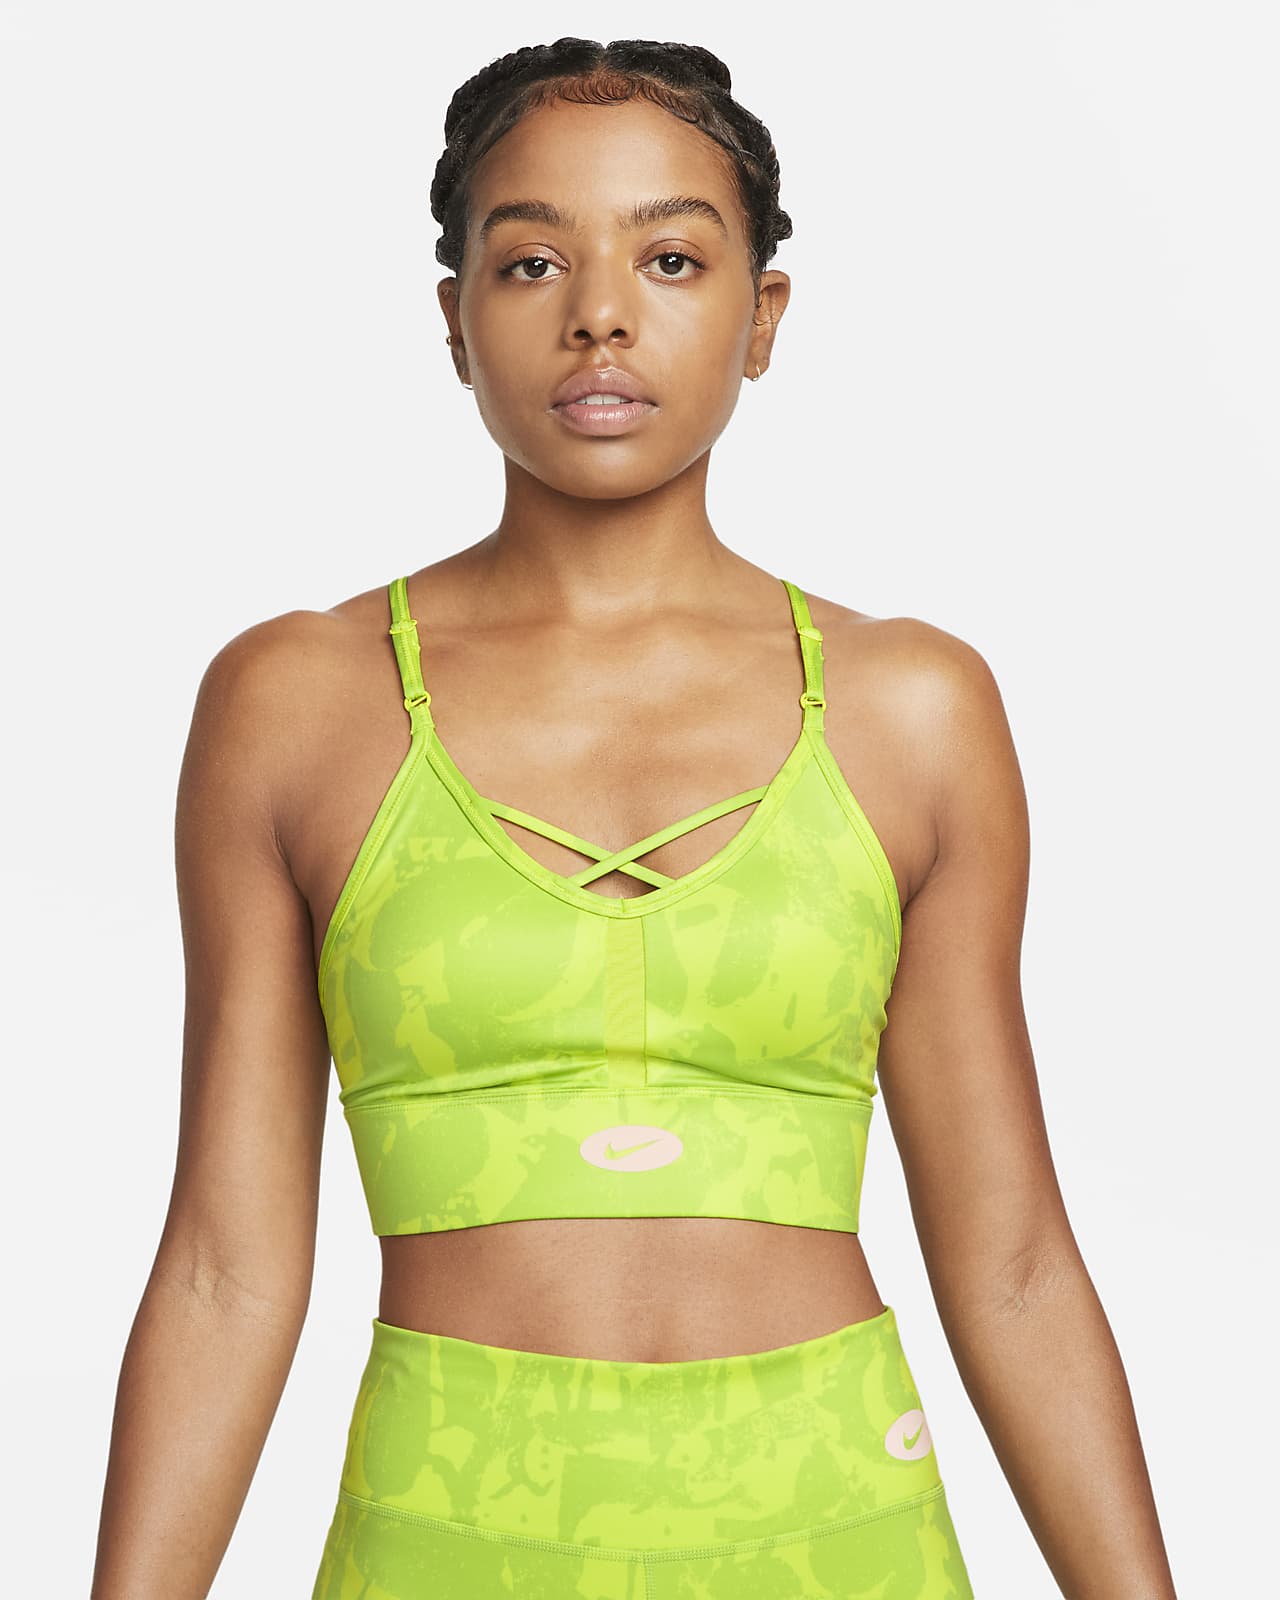 helicopter Founder harpoon Nike Indy Icon Clash Women's Light-Support Padded Printed Sports Bra. Nike .com